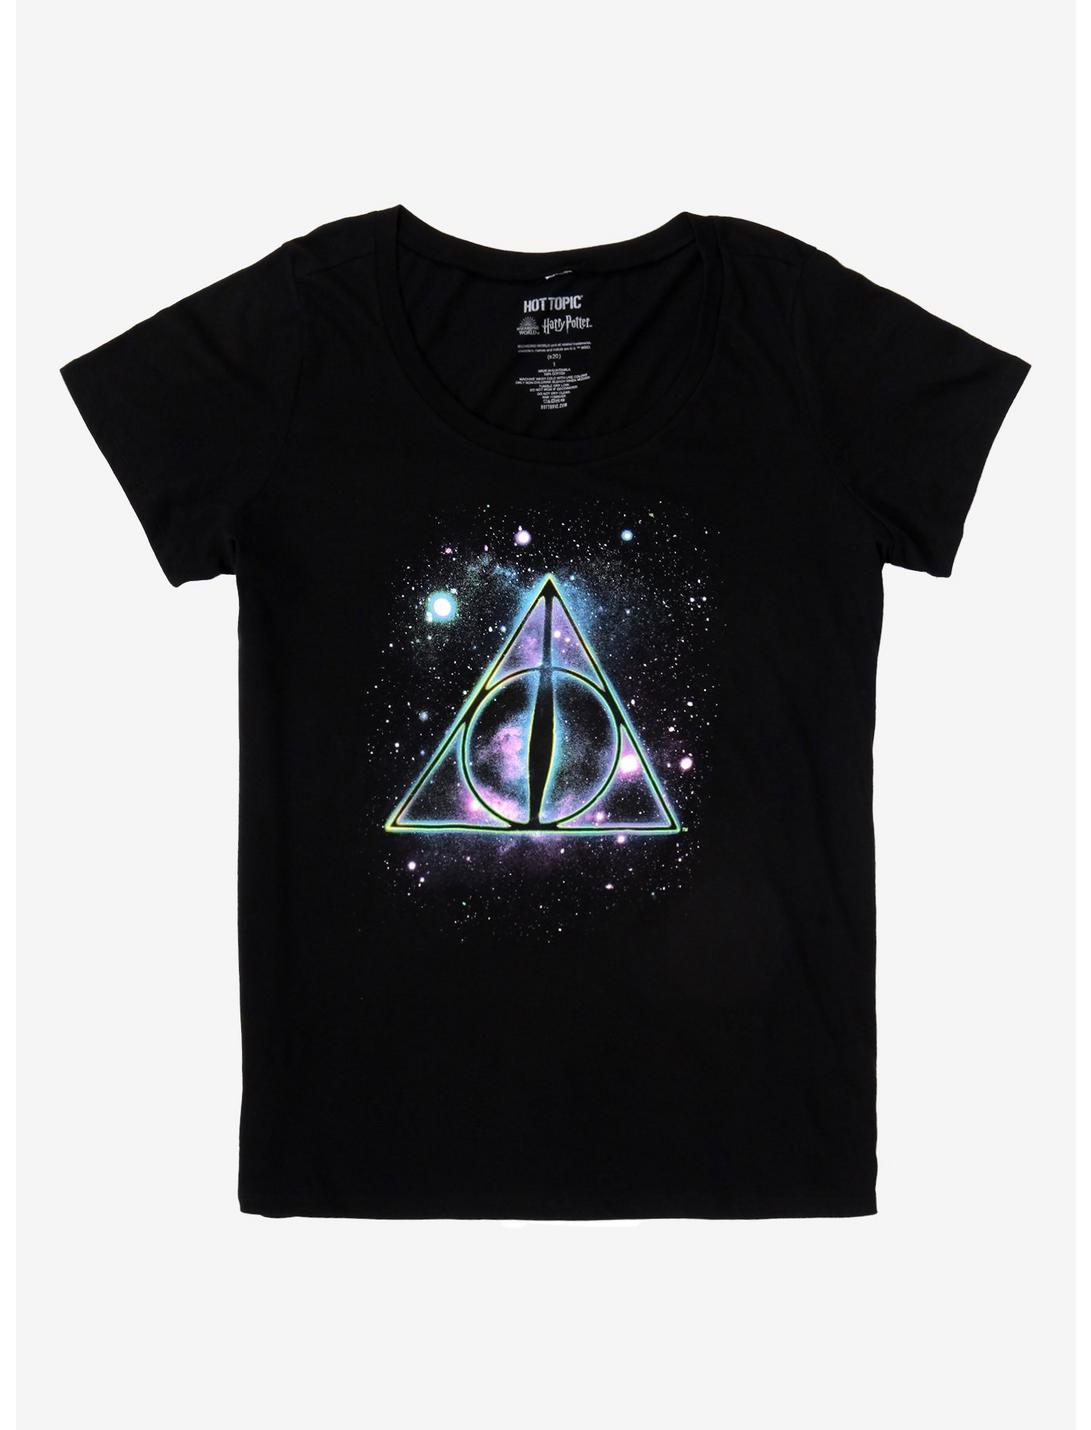 Harry Potter Deathly Hallows Galaxy Girls T-Shirt Plus Size, BLACK, hi-res